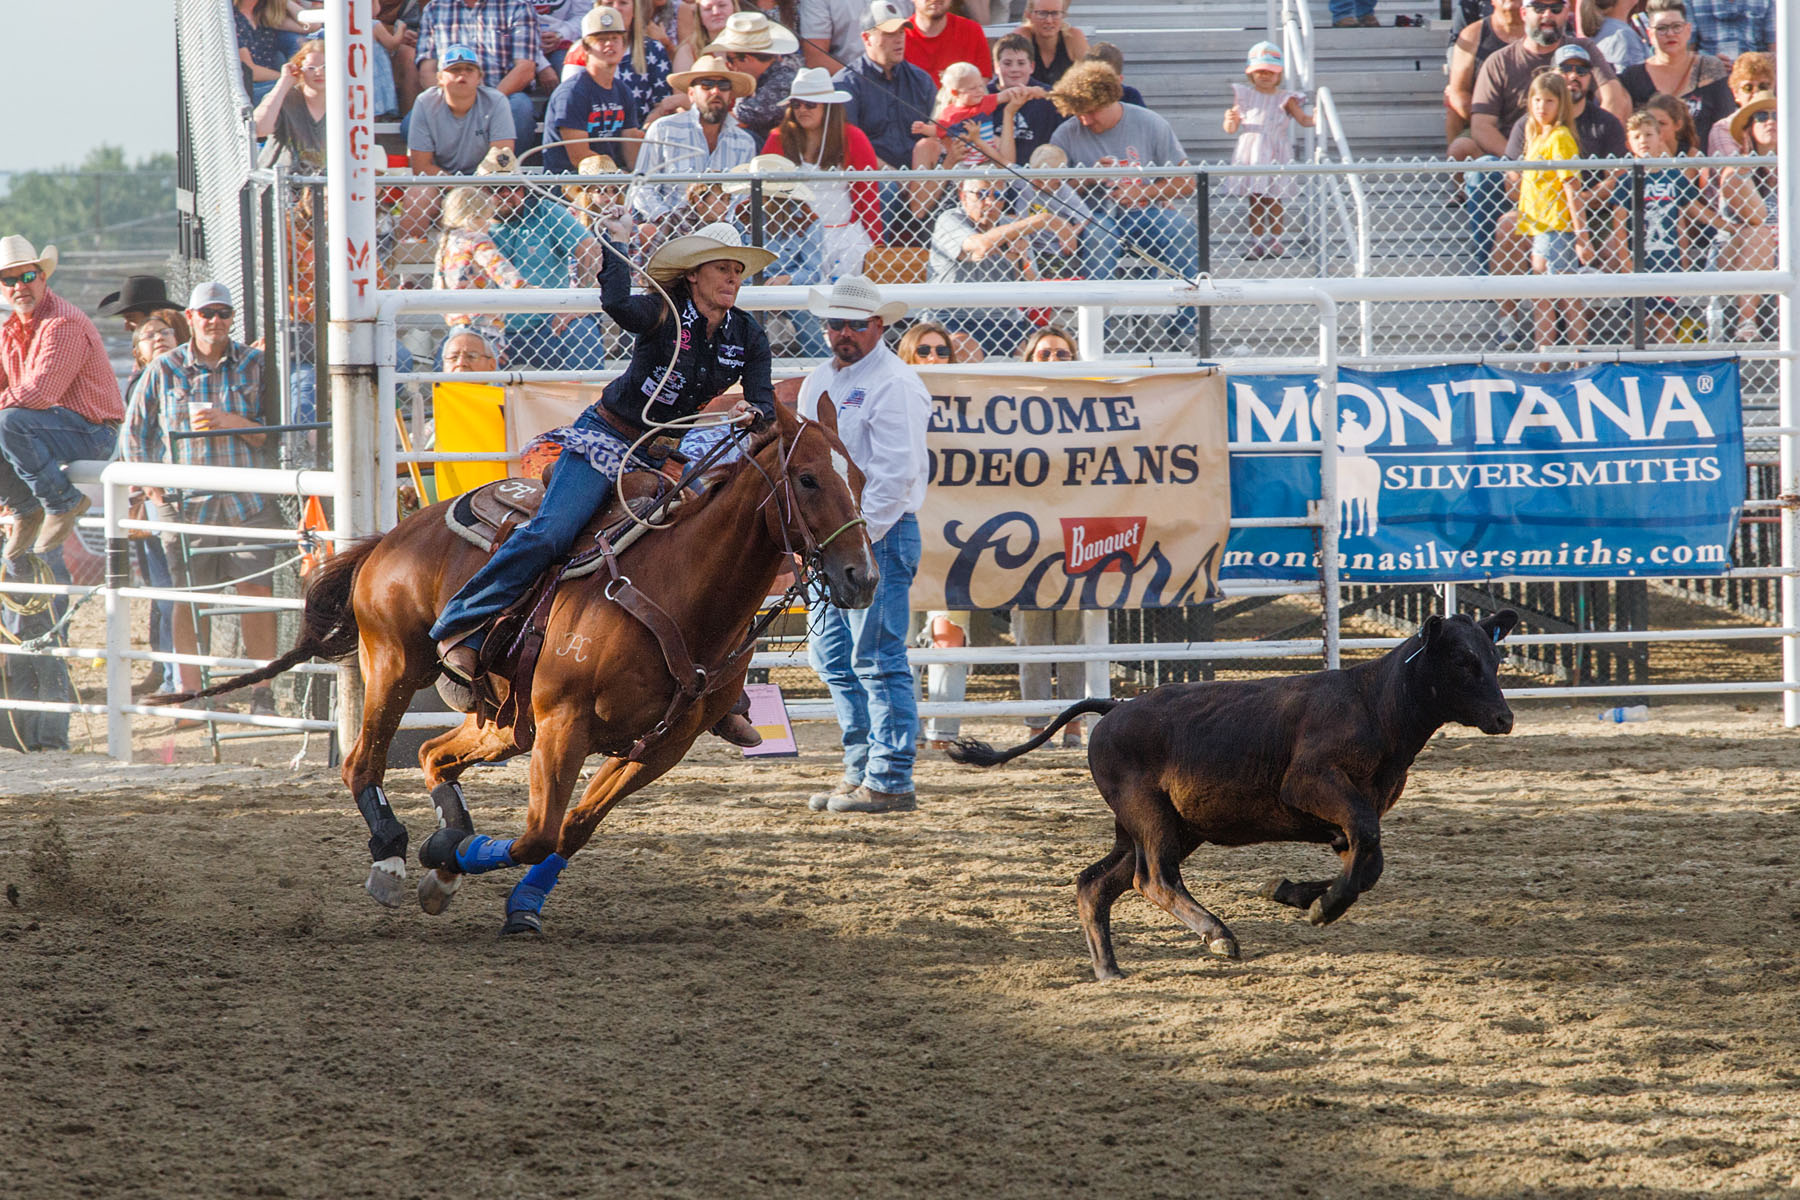 Breakaway Roping, Home of Champions Rodeo, Red Lodge, MT.  Click for next photo.